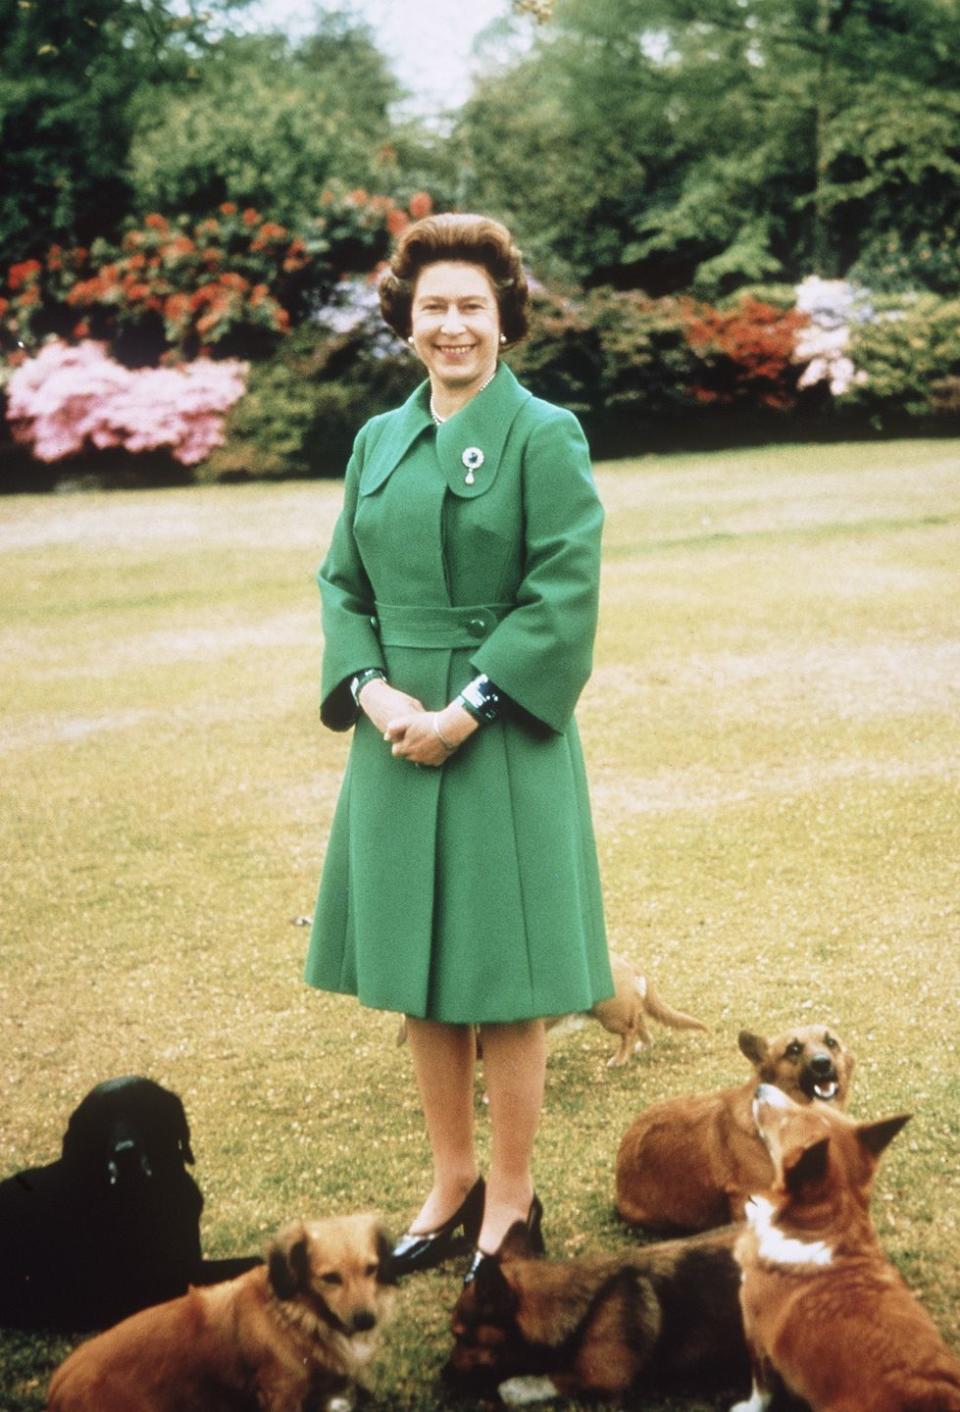 48) The Queen's dogs are always prepared gourmet meals.